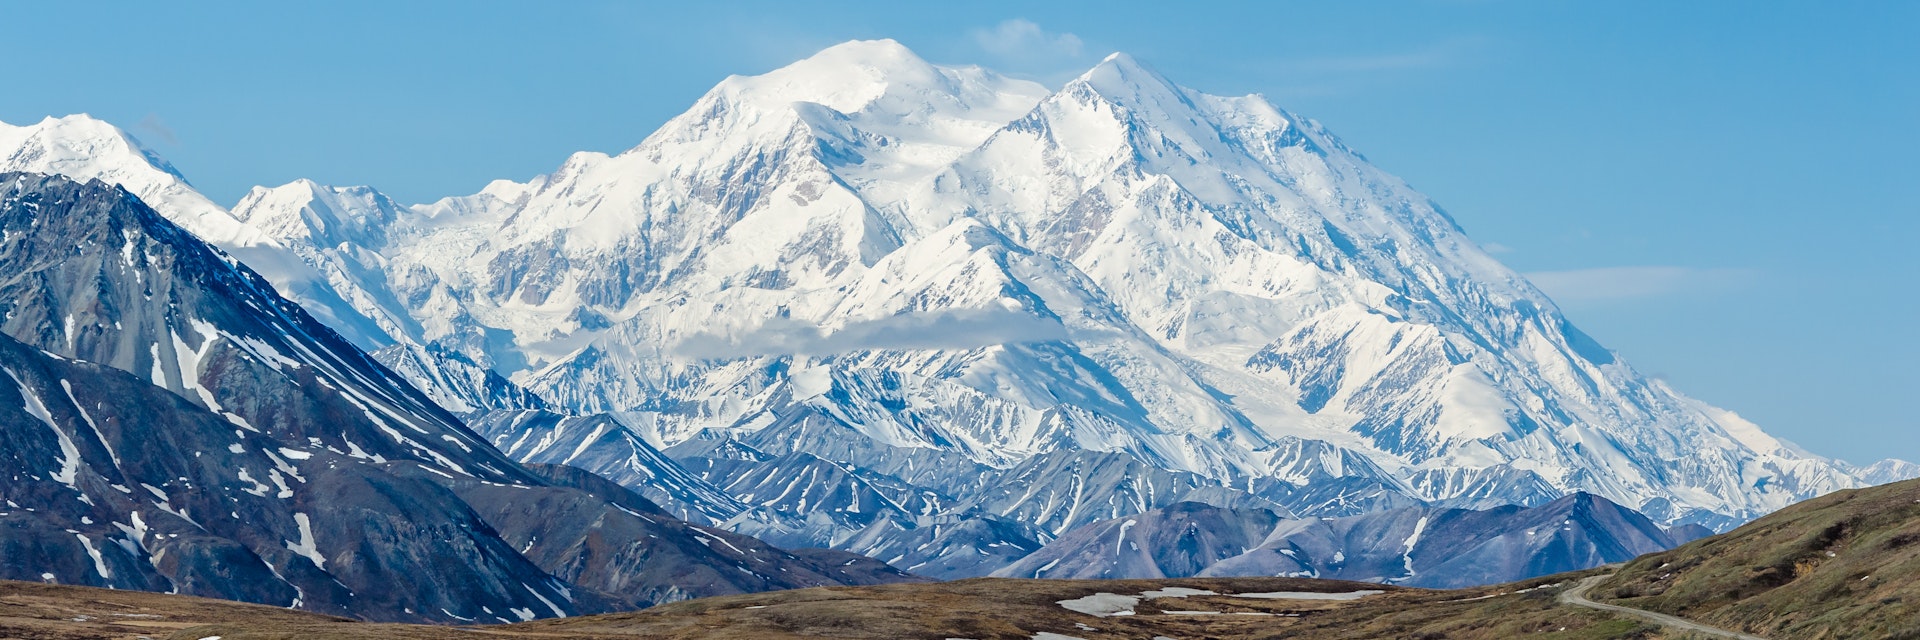 DENALI NATIONAL PARK, ALASKA, USA - JUNE 9 2013: Mt McKinley on a clear day on June 9 2013 in Alaska.  Mt McKinley is the highest mountain in North America and on August 28 2015 was renamed to Denali.
389540554
outdoor, snowy, clear, natural, park, national, day, dramatic, glacier, summer, tundra, denali, range, mckinley, mt, blue, wilderness, mountain, sky, scenic, snow, wild, nature, pretty, alaska, landscape